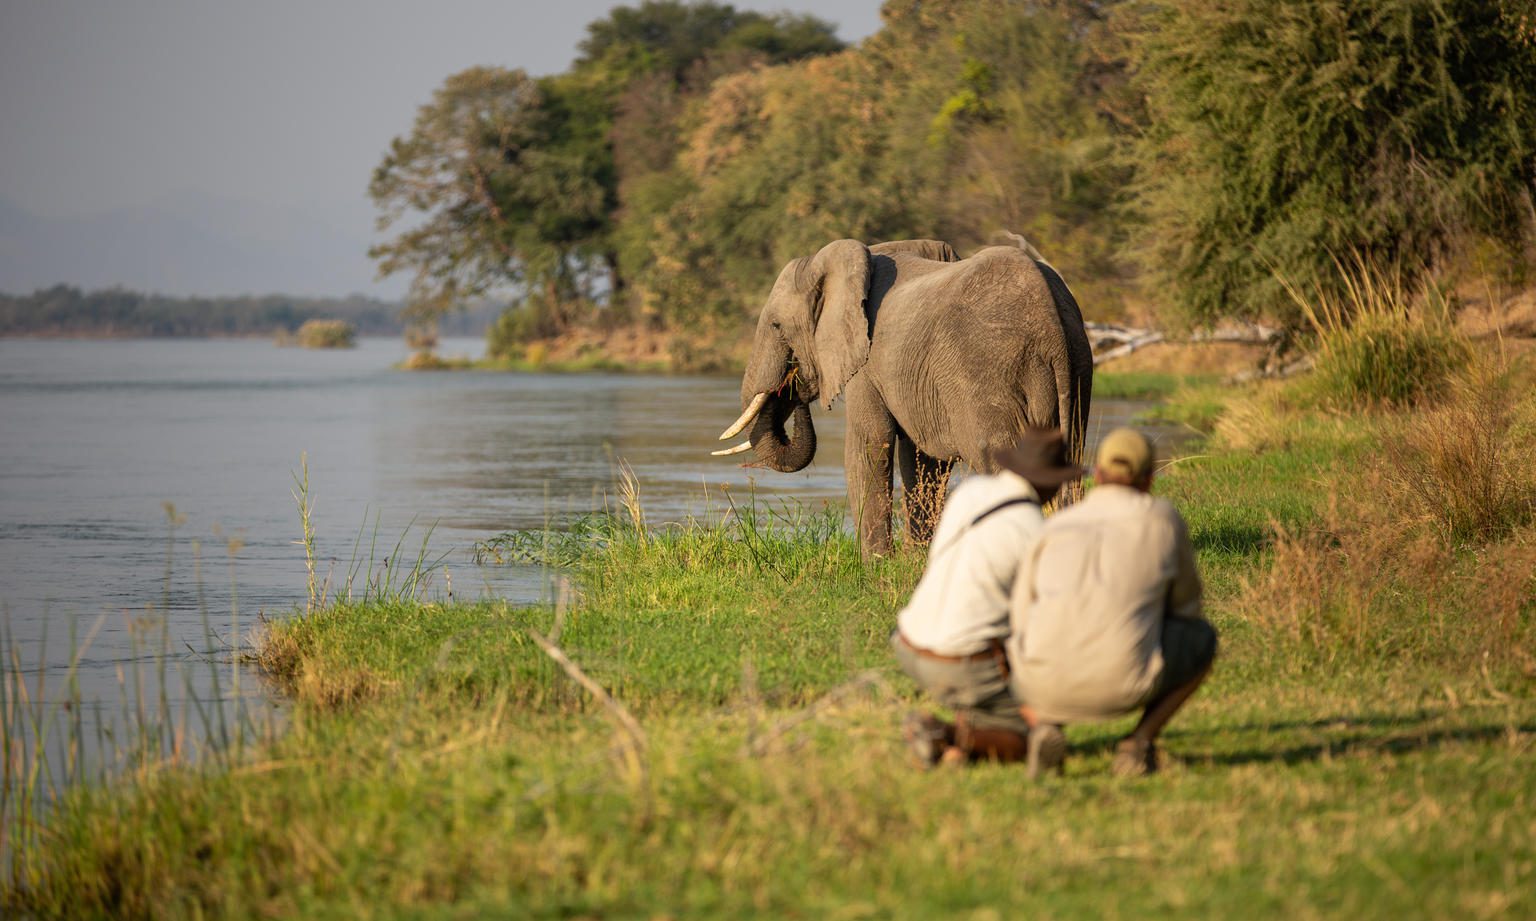 two people crouch beside a river watching an elephant at the water's edge